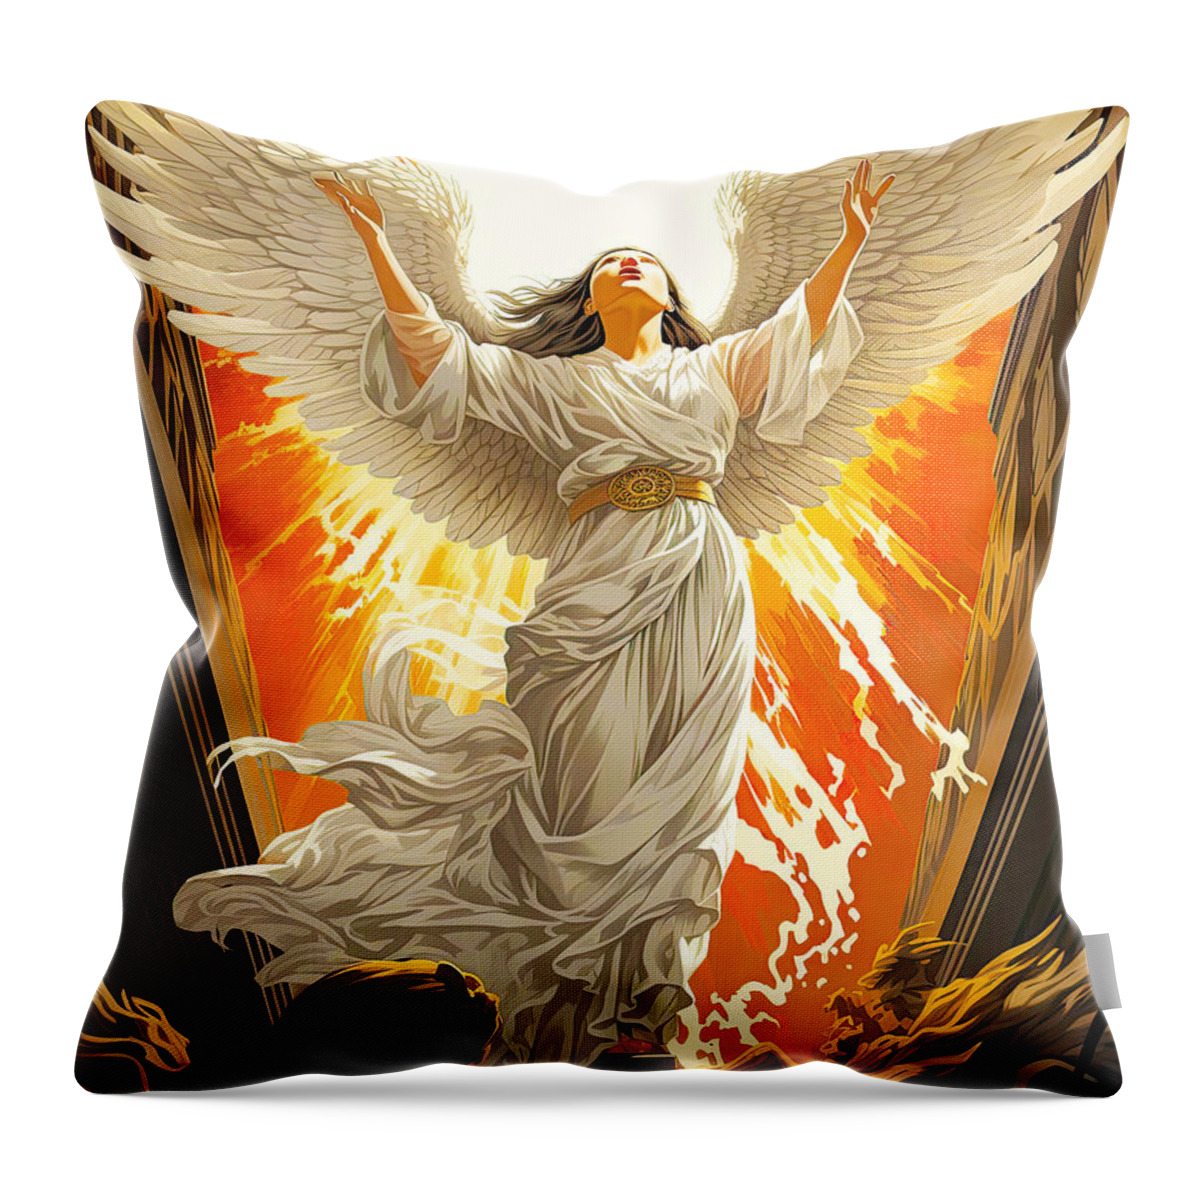 Angel Throw Pillow featuring the painting Rejoice by Tessa Evette